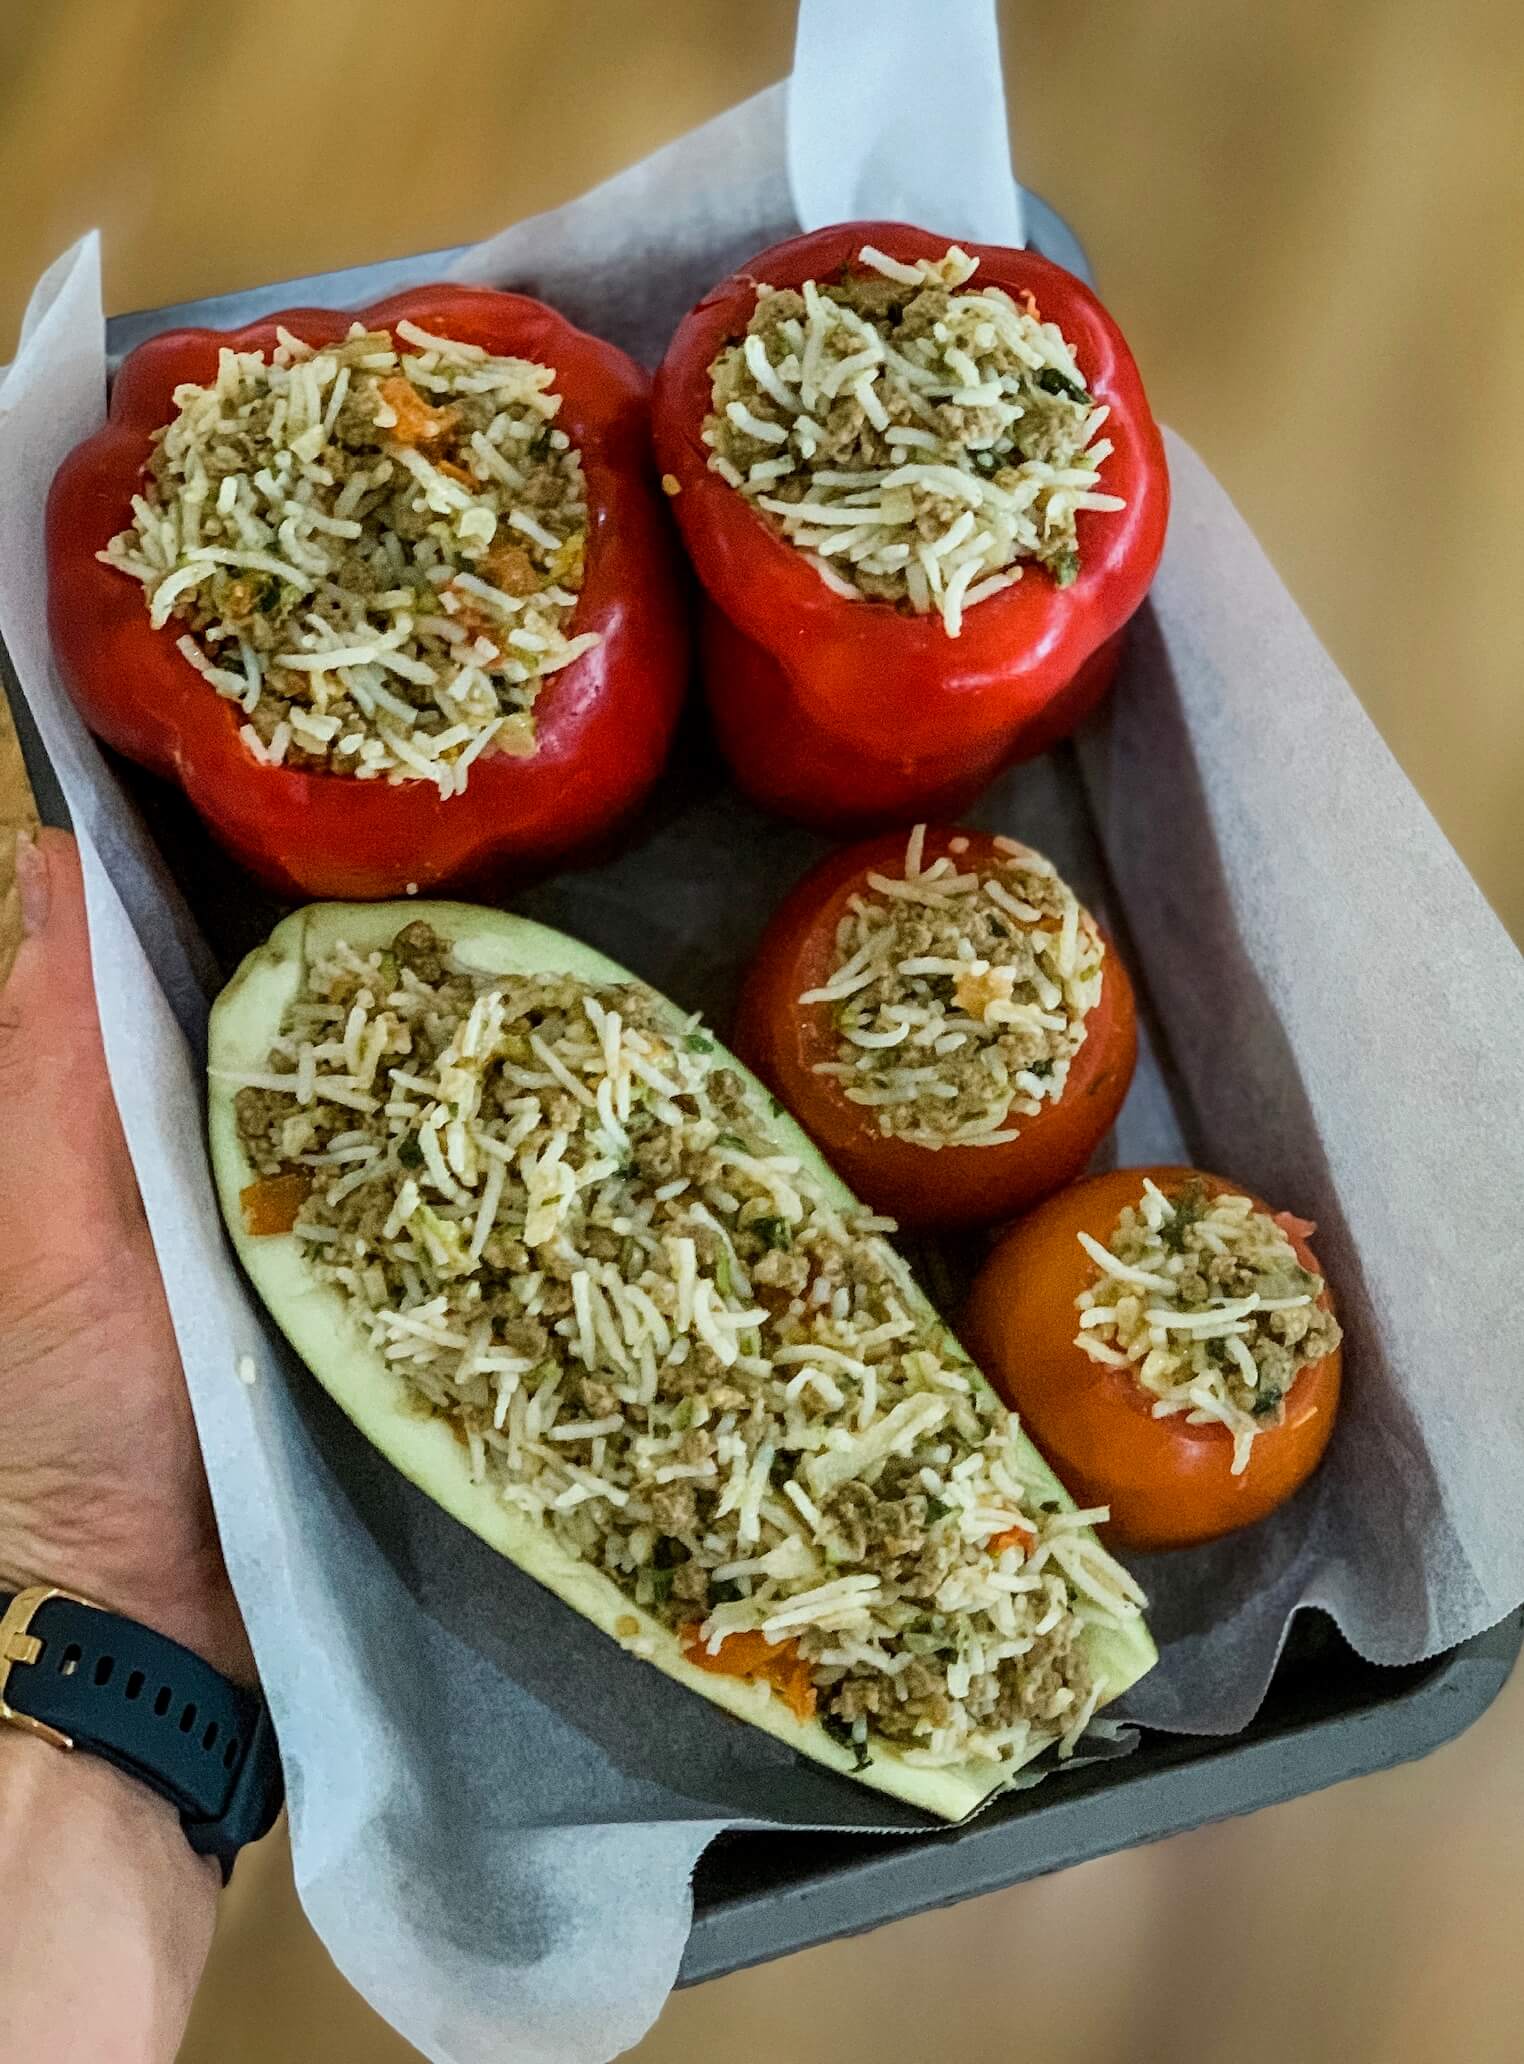 Stuffed veg ready for the oven